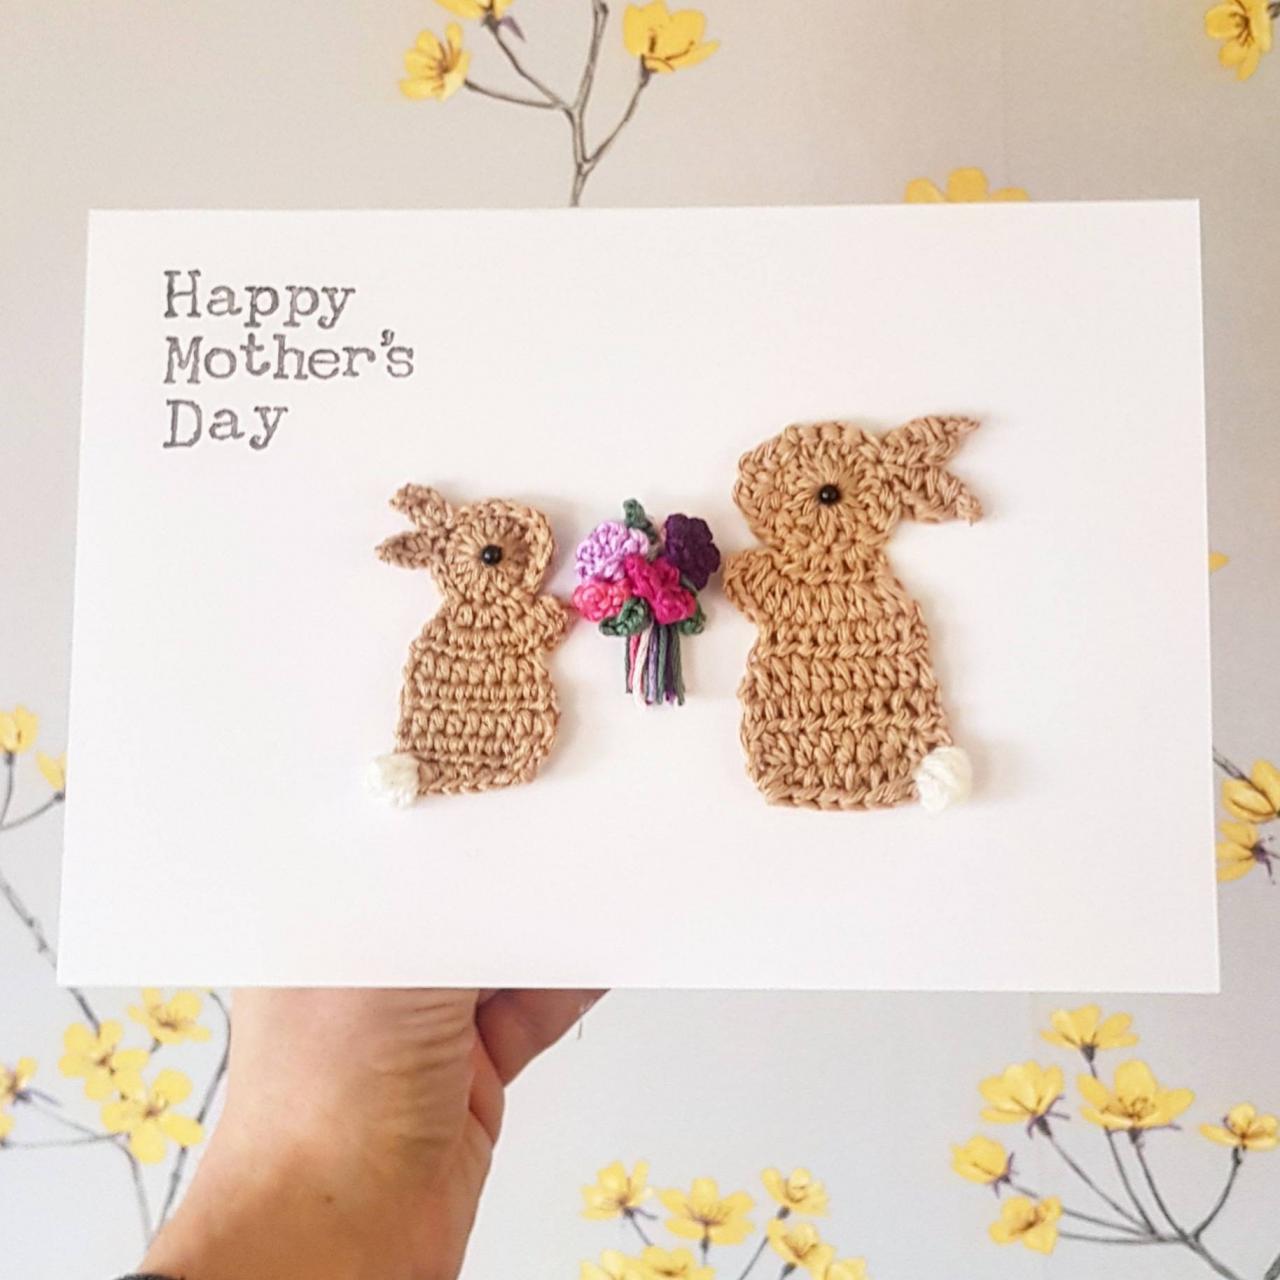 Cute Crochet Greeting Card, Personalised Mother's Day Card, Mum Birthday Card, Bunny Crochet Greeting Card, Cute Mum Birthday Card, Mothers Cards,Grandma Birthday Card